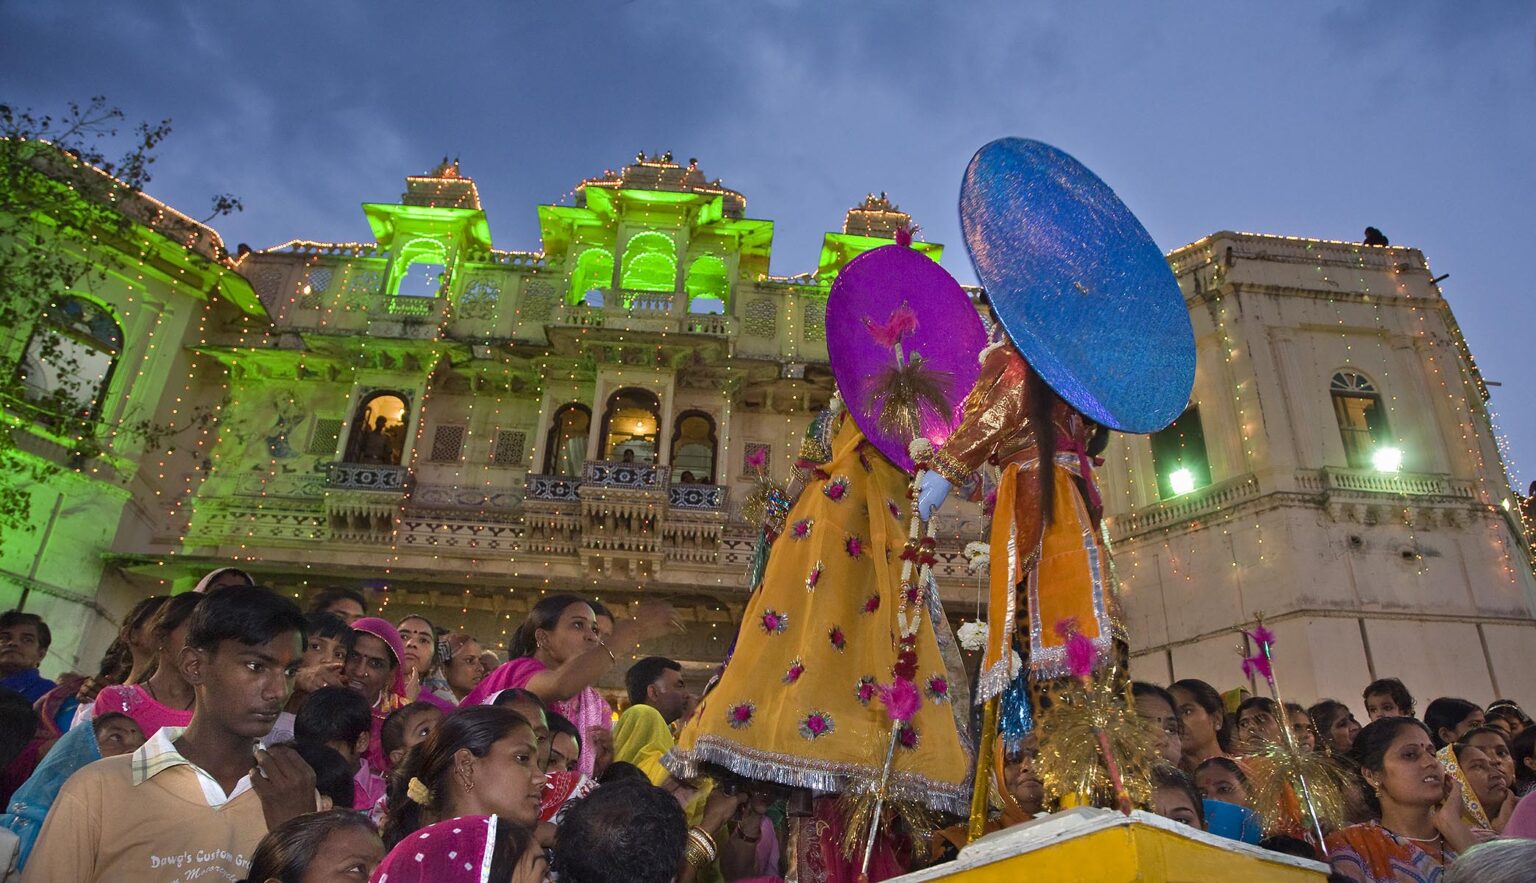 Rajasthani women carry effigies of Shiva and his wife Parvati at the GANGUR FESTIVAL also known as the MEWAR FESTIVAL in UDAIPUR - RAJASTHAN, INDIA